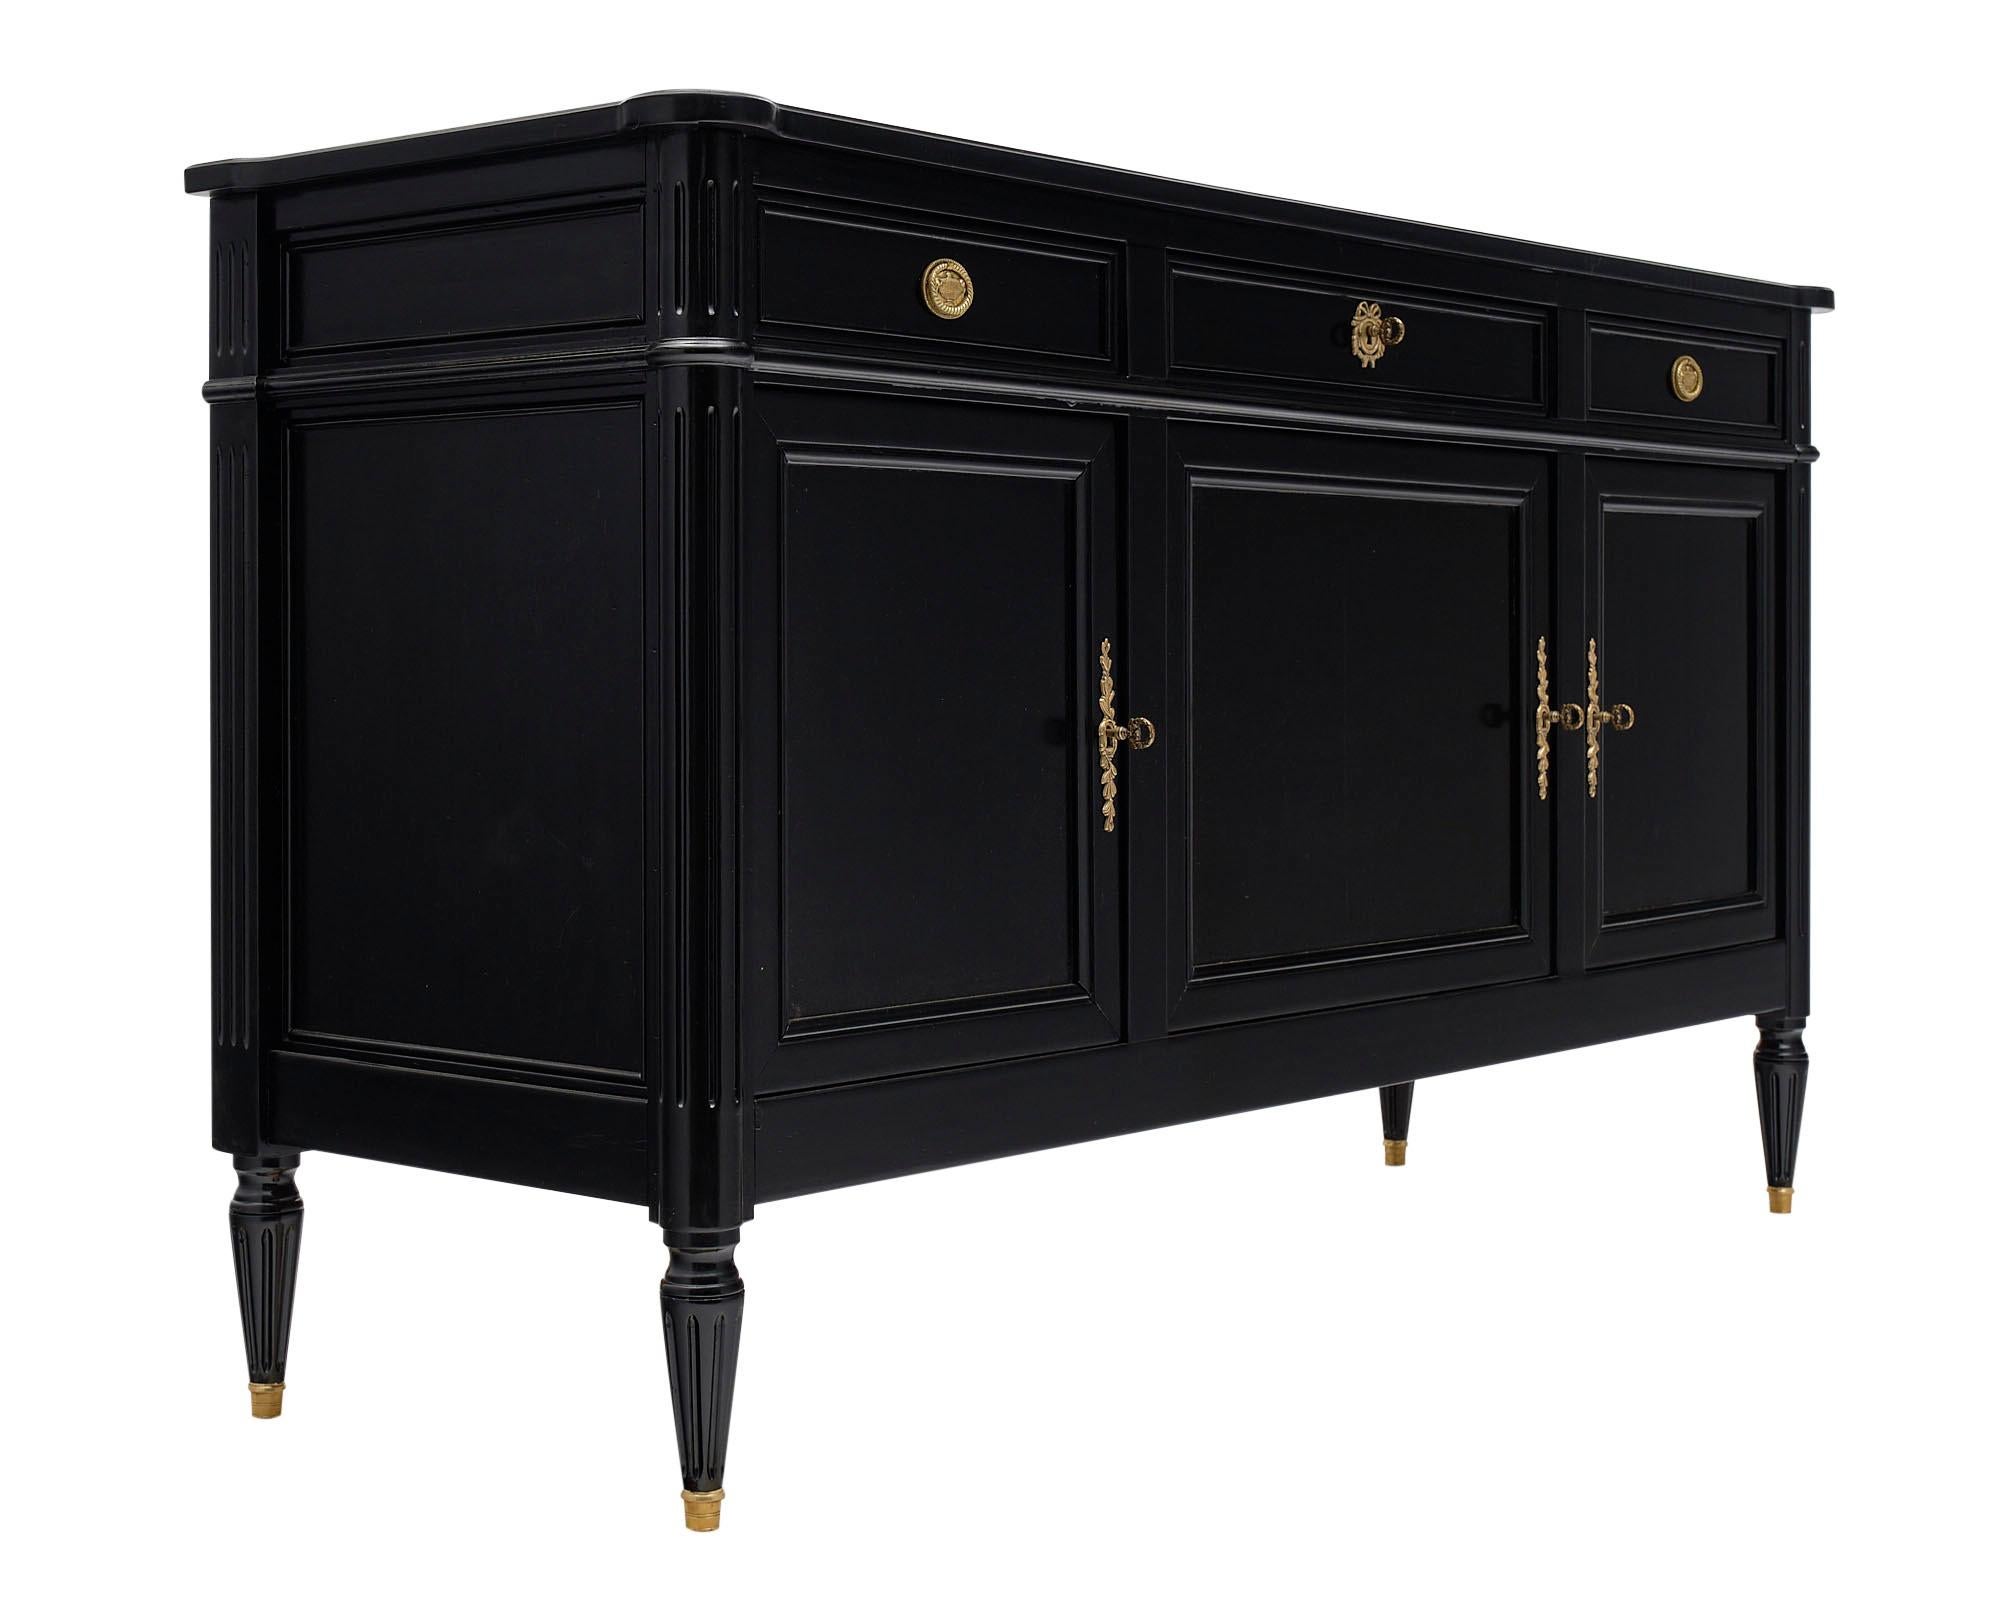 Louis XVI style ebonized buffet made of mahogany and finished with a French ebonized and lustrous polish. There are three dovetailed drawers above three doors that open to adjustable shelving. We love the brass hardware original to the piece and the